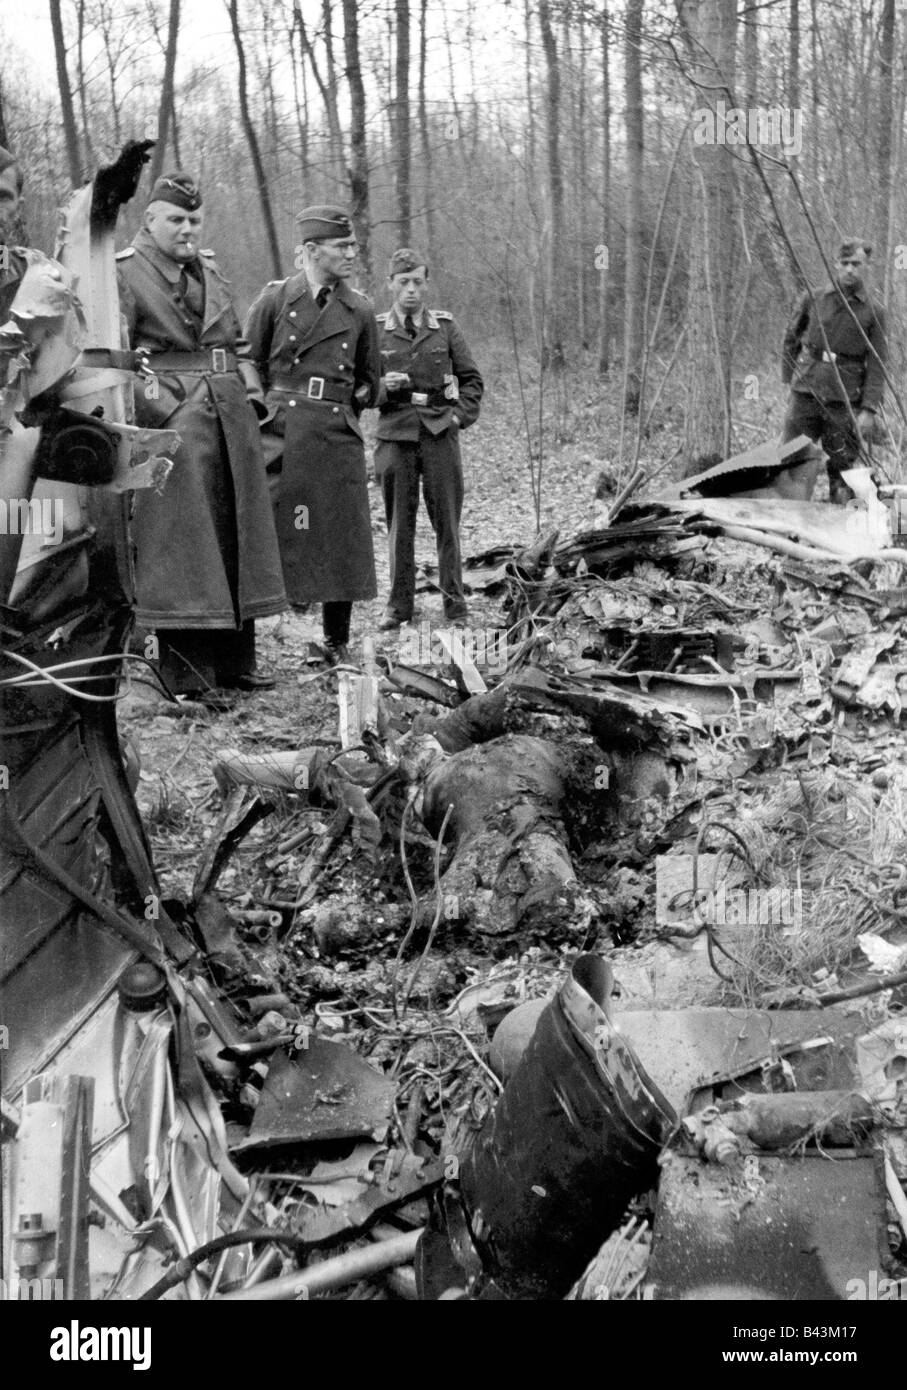 events, Second World War / WWII, aerial warfare, aircraft, crashed / damaged, German officers examining the wreckage of a British bomber, shot down by a German night fighter near Compiegne, France, on 9.4.1943, Stock Photo